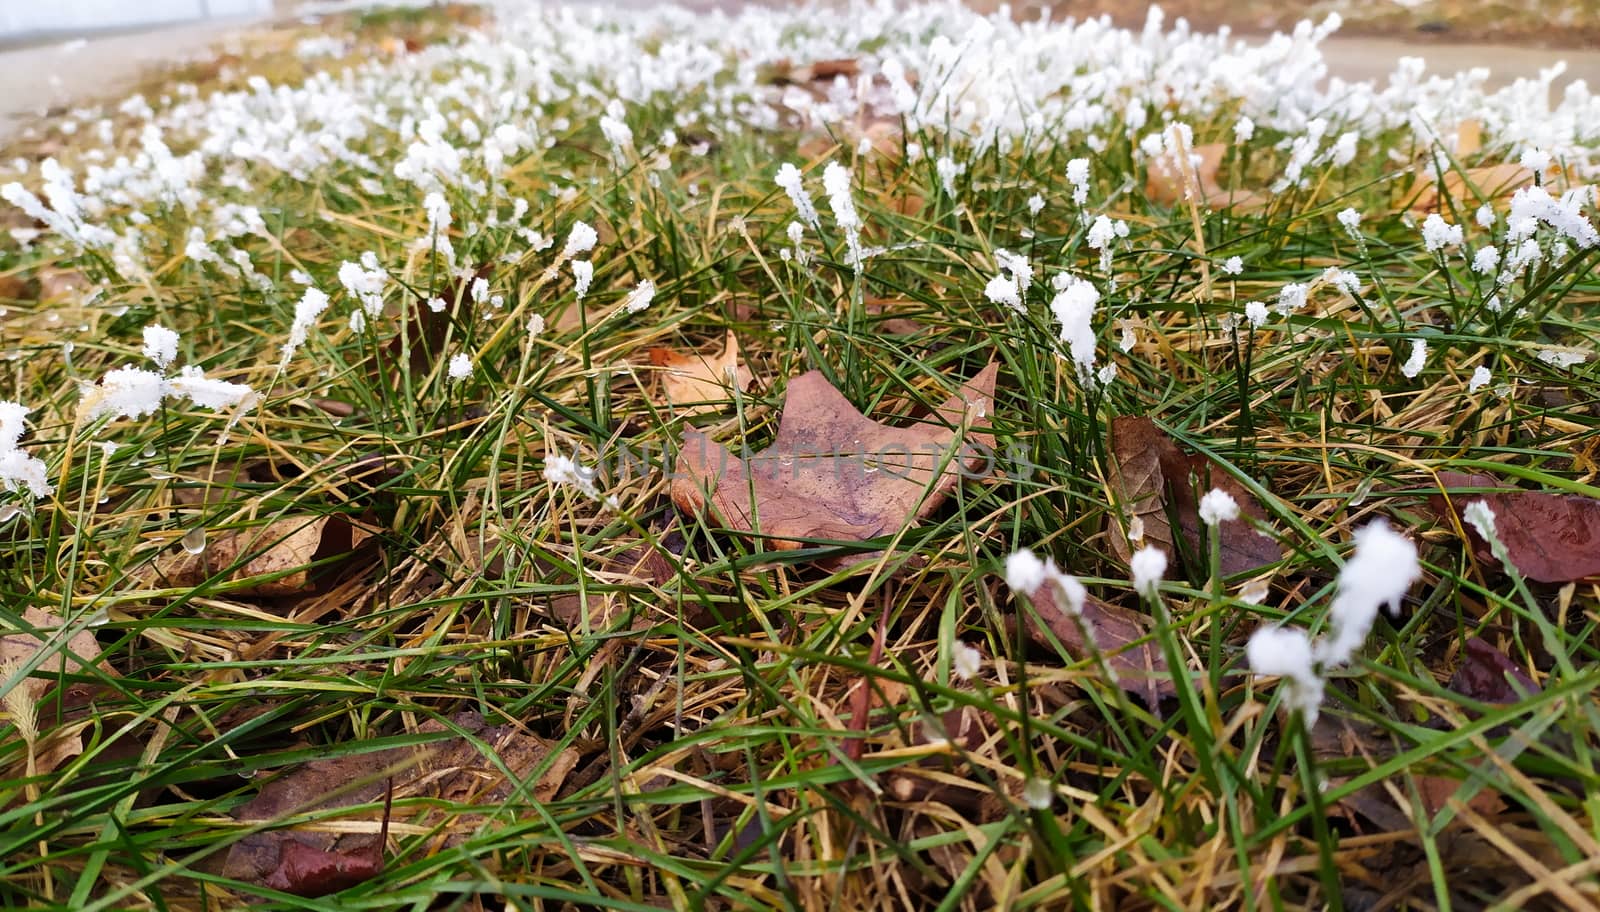 Snow fell on the grass and stuck to the tips of the grass.